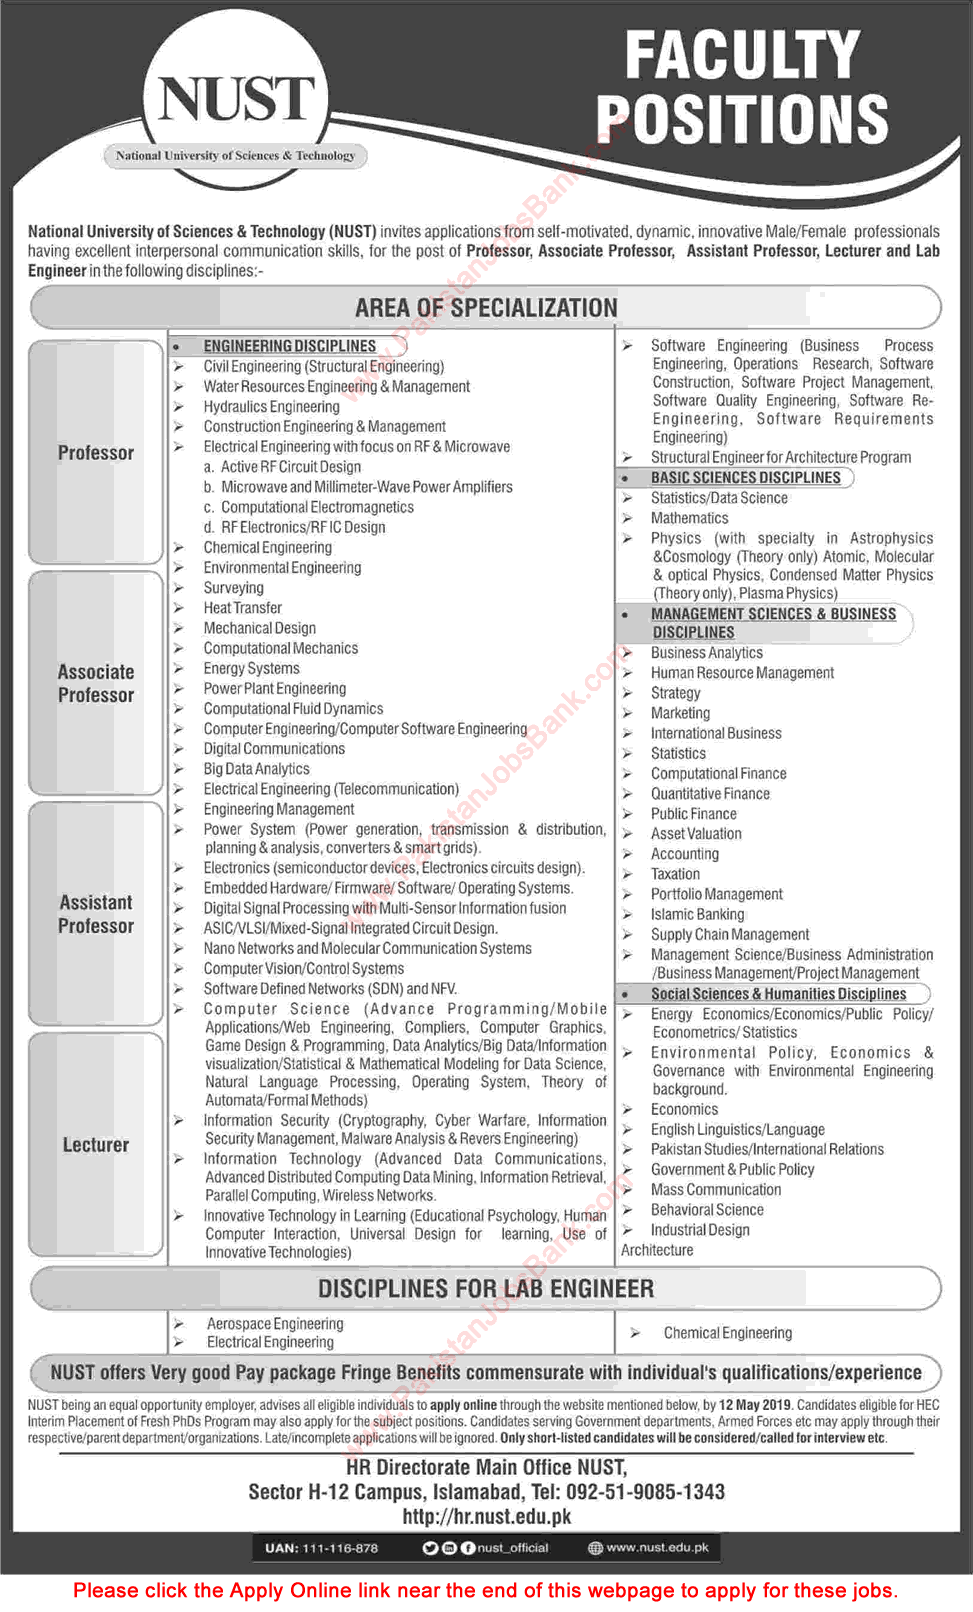 NUST University Islamabad Jobs April 2019 May Apply Online Teaching Faculty & Lab Engineers Latest